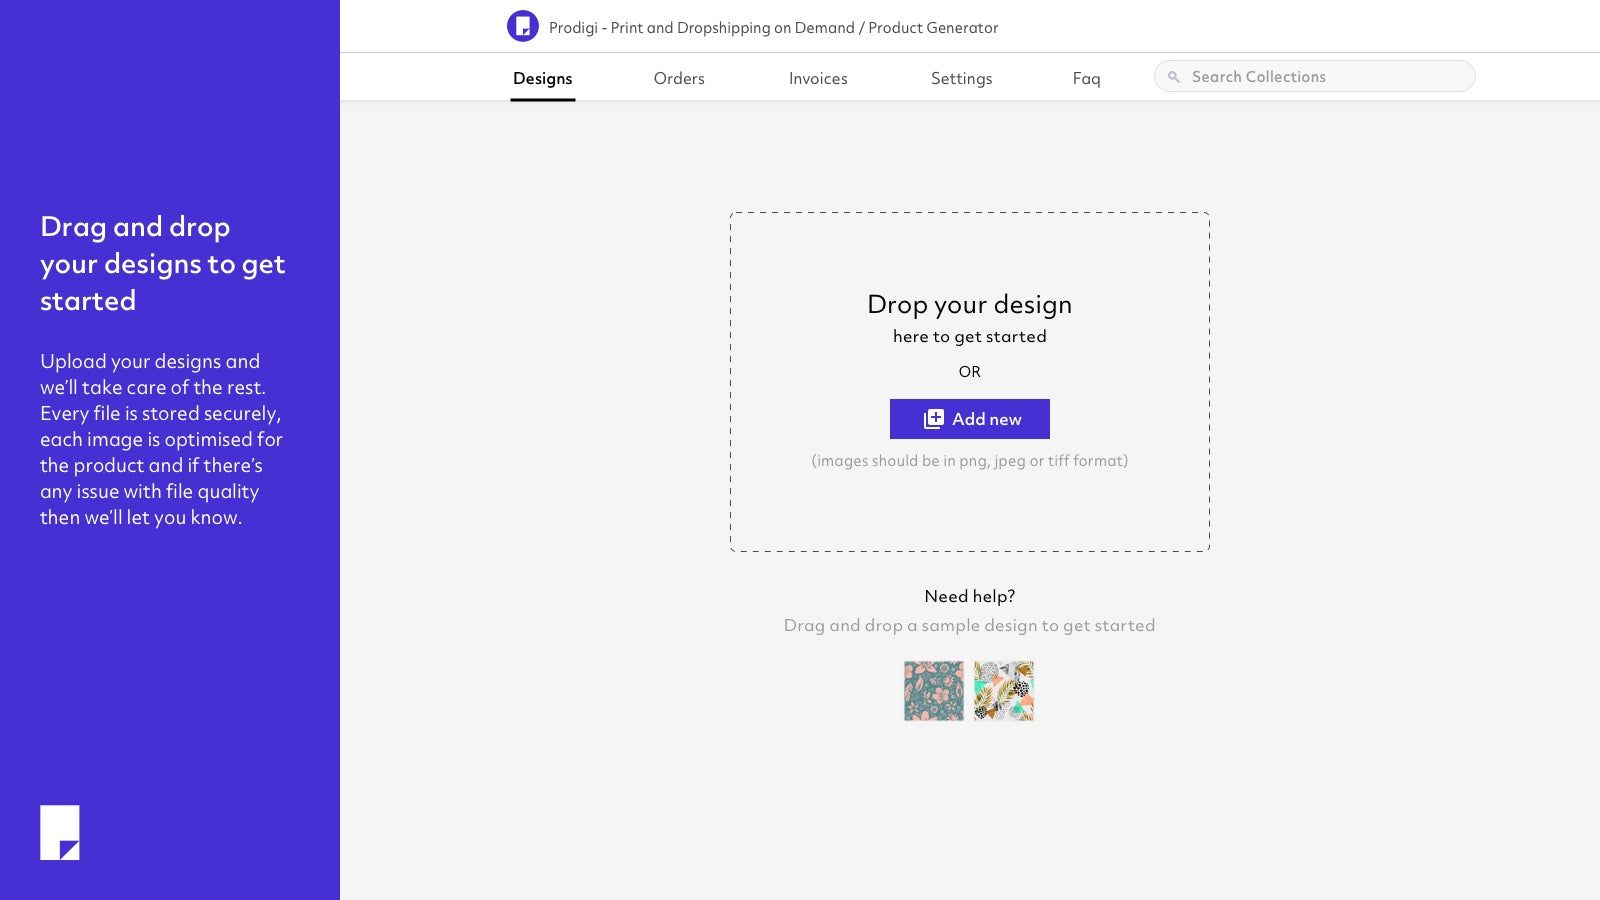 Drag and drop your designs to get started